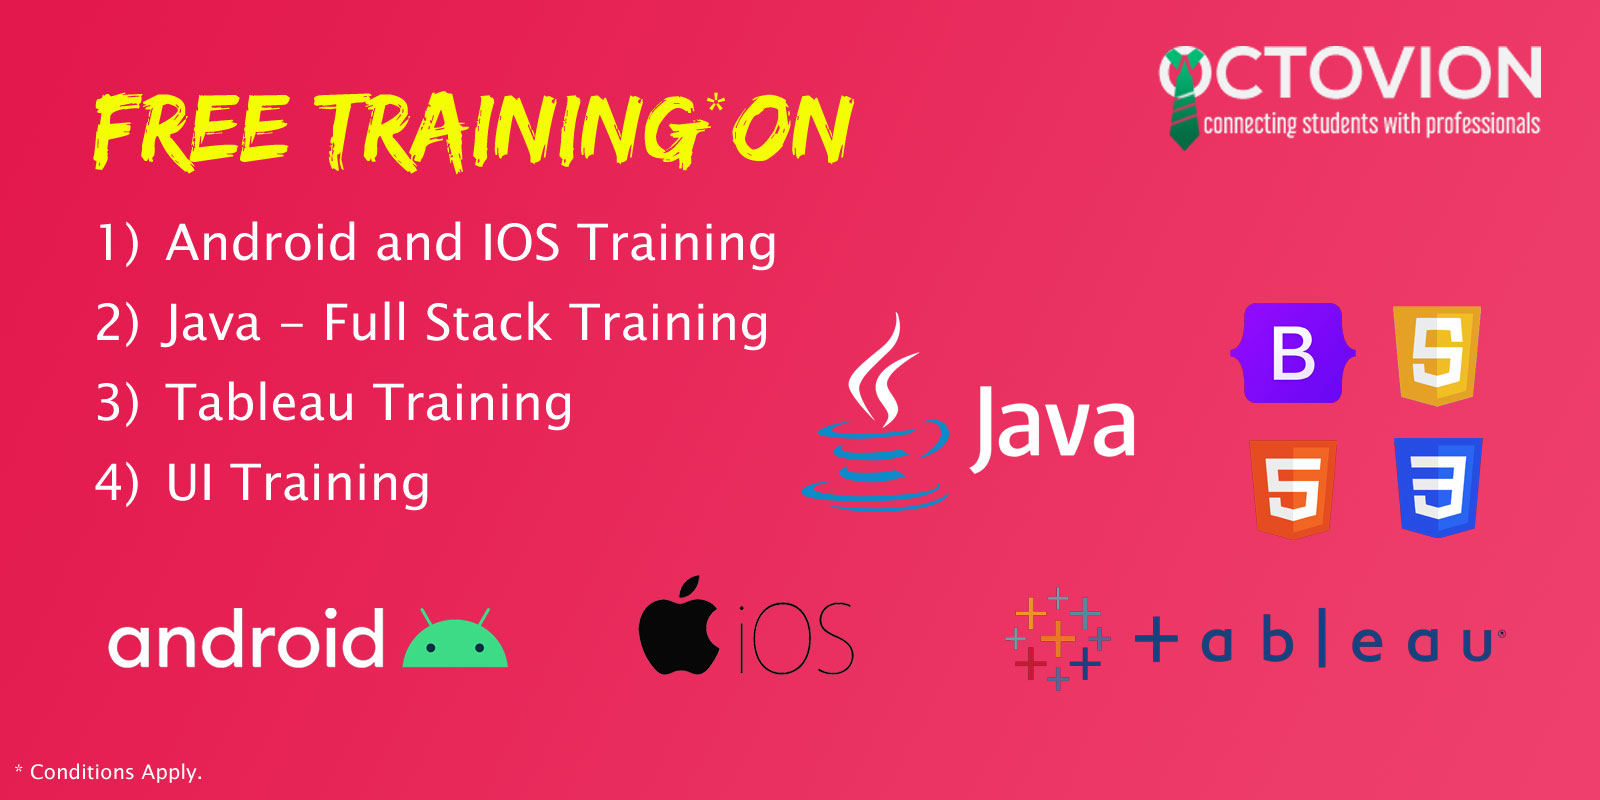 Free Training On Android, Java, Tableau, Full Stack Developer For OPT, GC, CITIZEN, H4 EAD Graduates